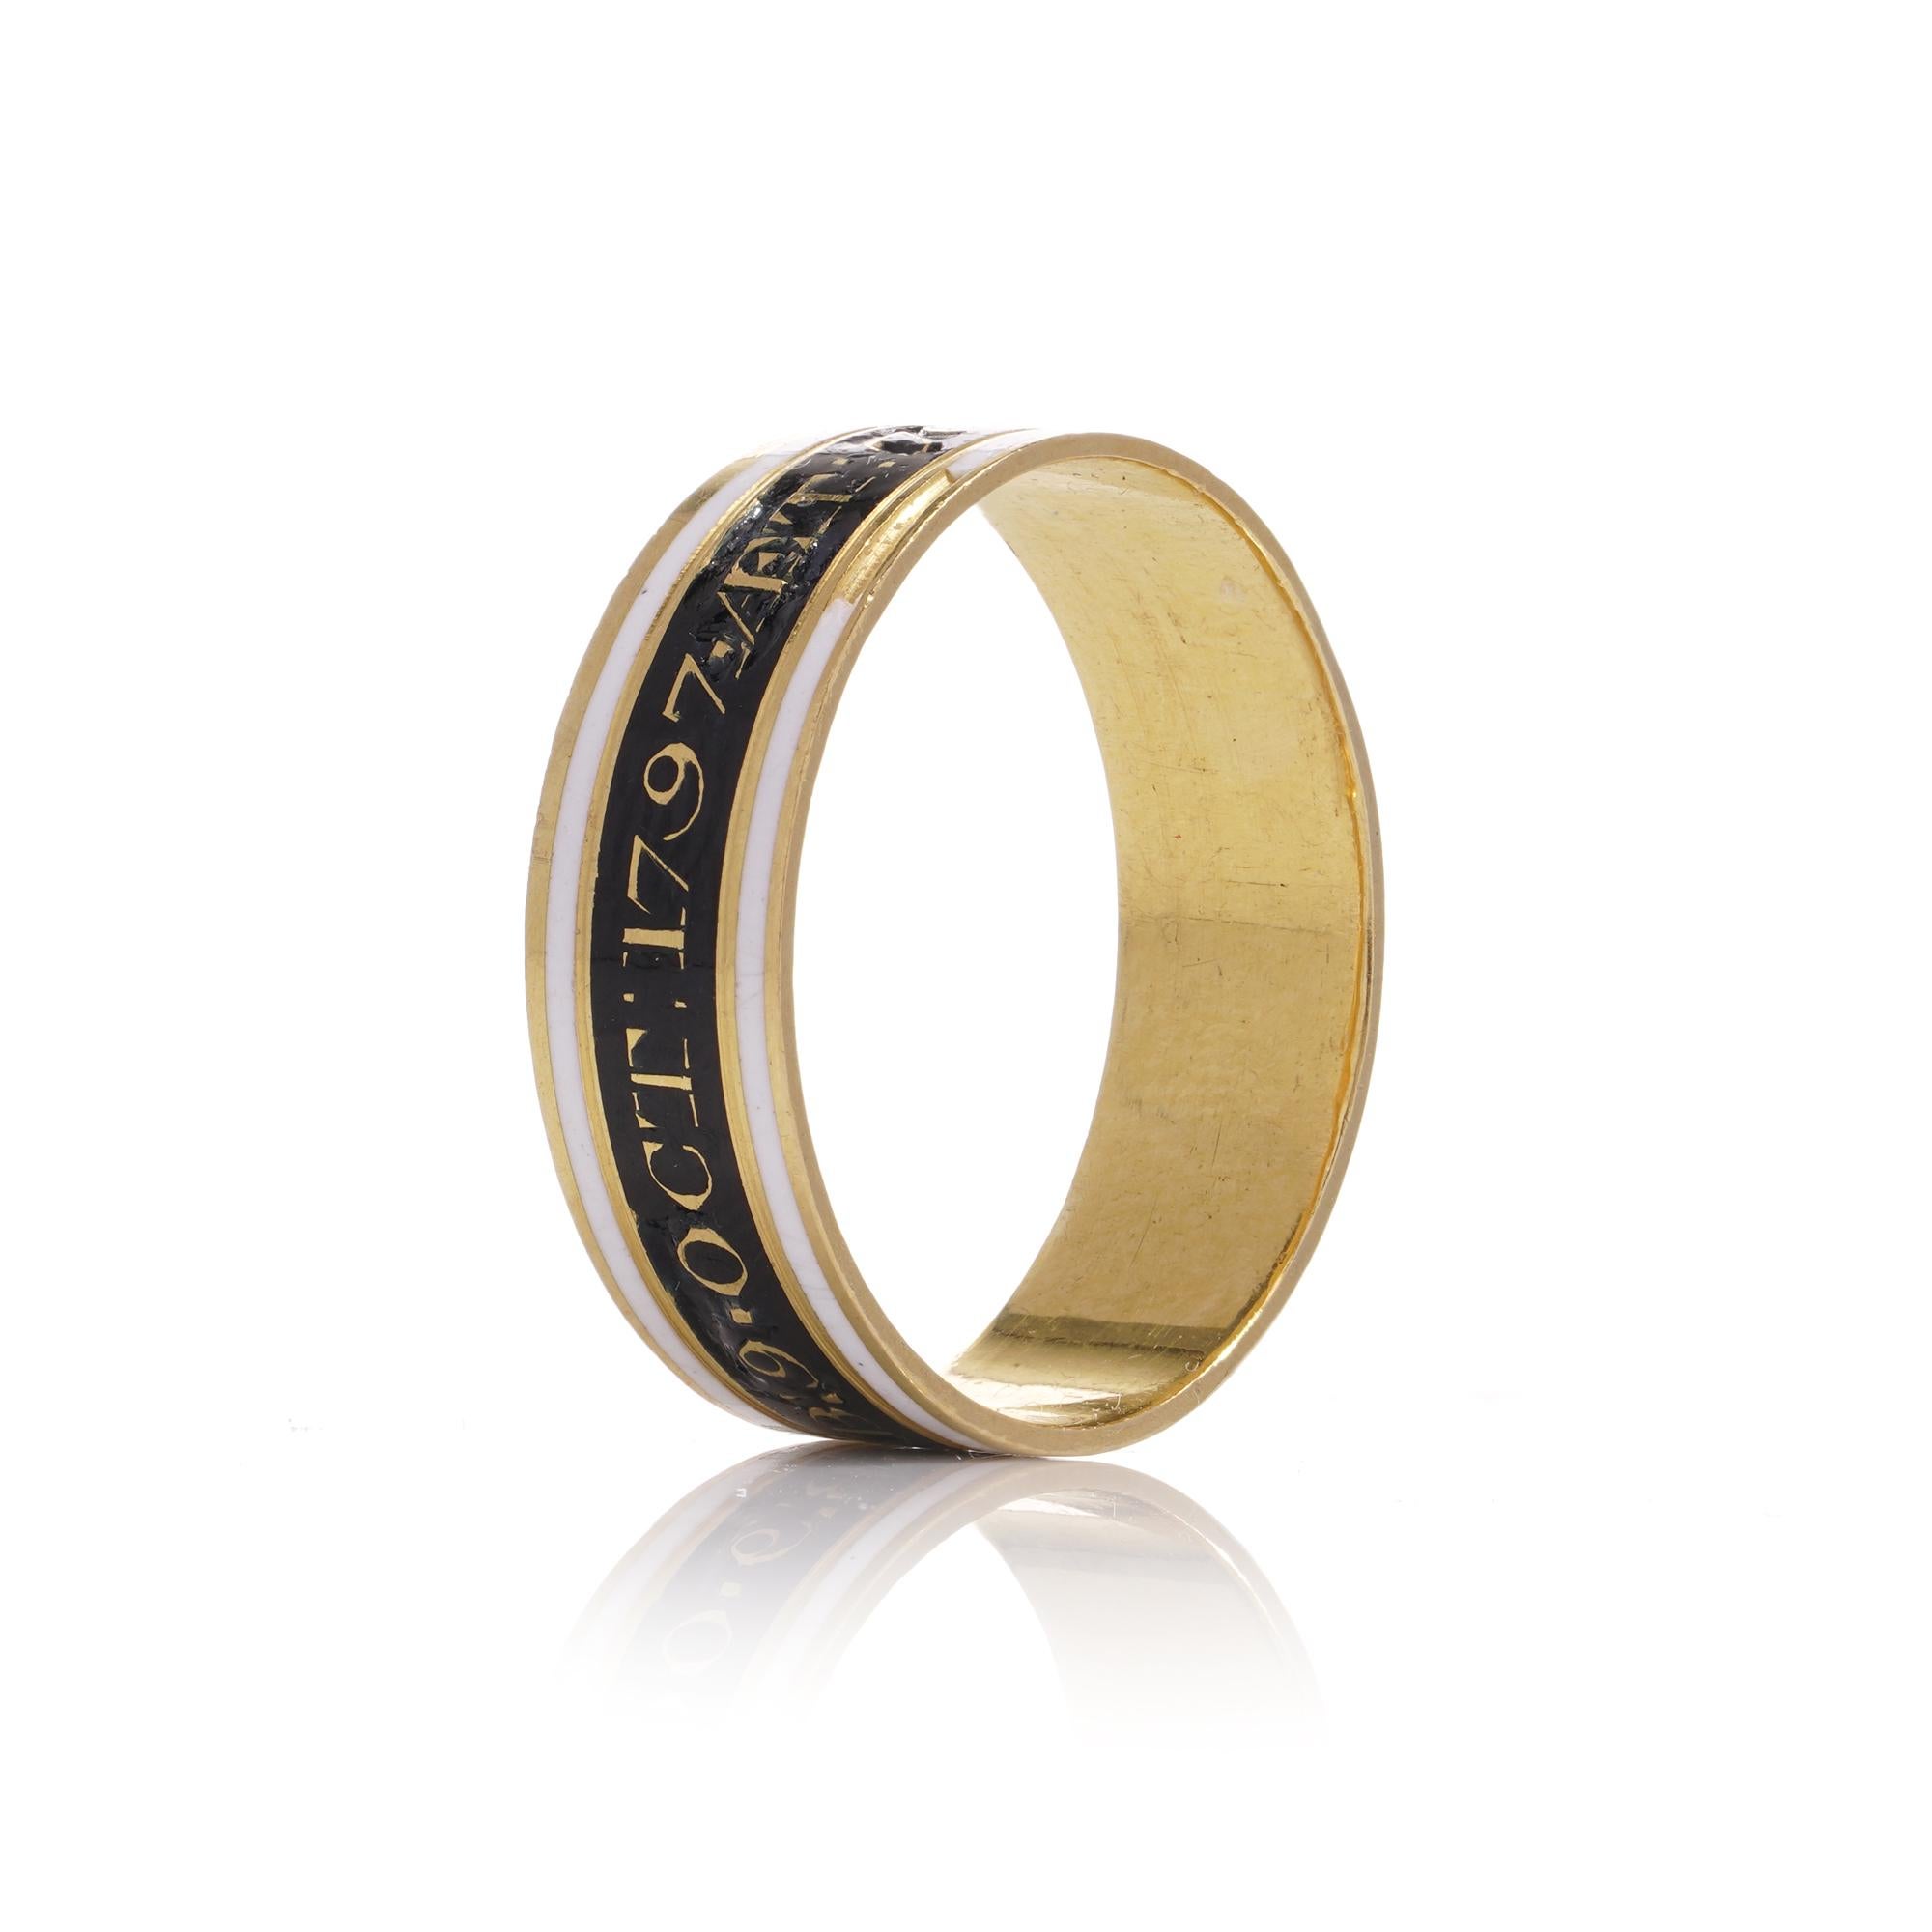 22kt. yellow gold and white and black enamel large size W band mourning ring with the inscription ' John Hall OB 9. October:1797 /ET: 76 
Fully hallmarked. 
Maker: W.H 

Dimensions -
Ring size: diameter x height: 2.3 x 0.6 cm 
Finger Size: (UK) W